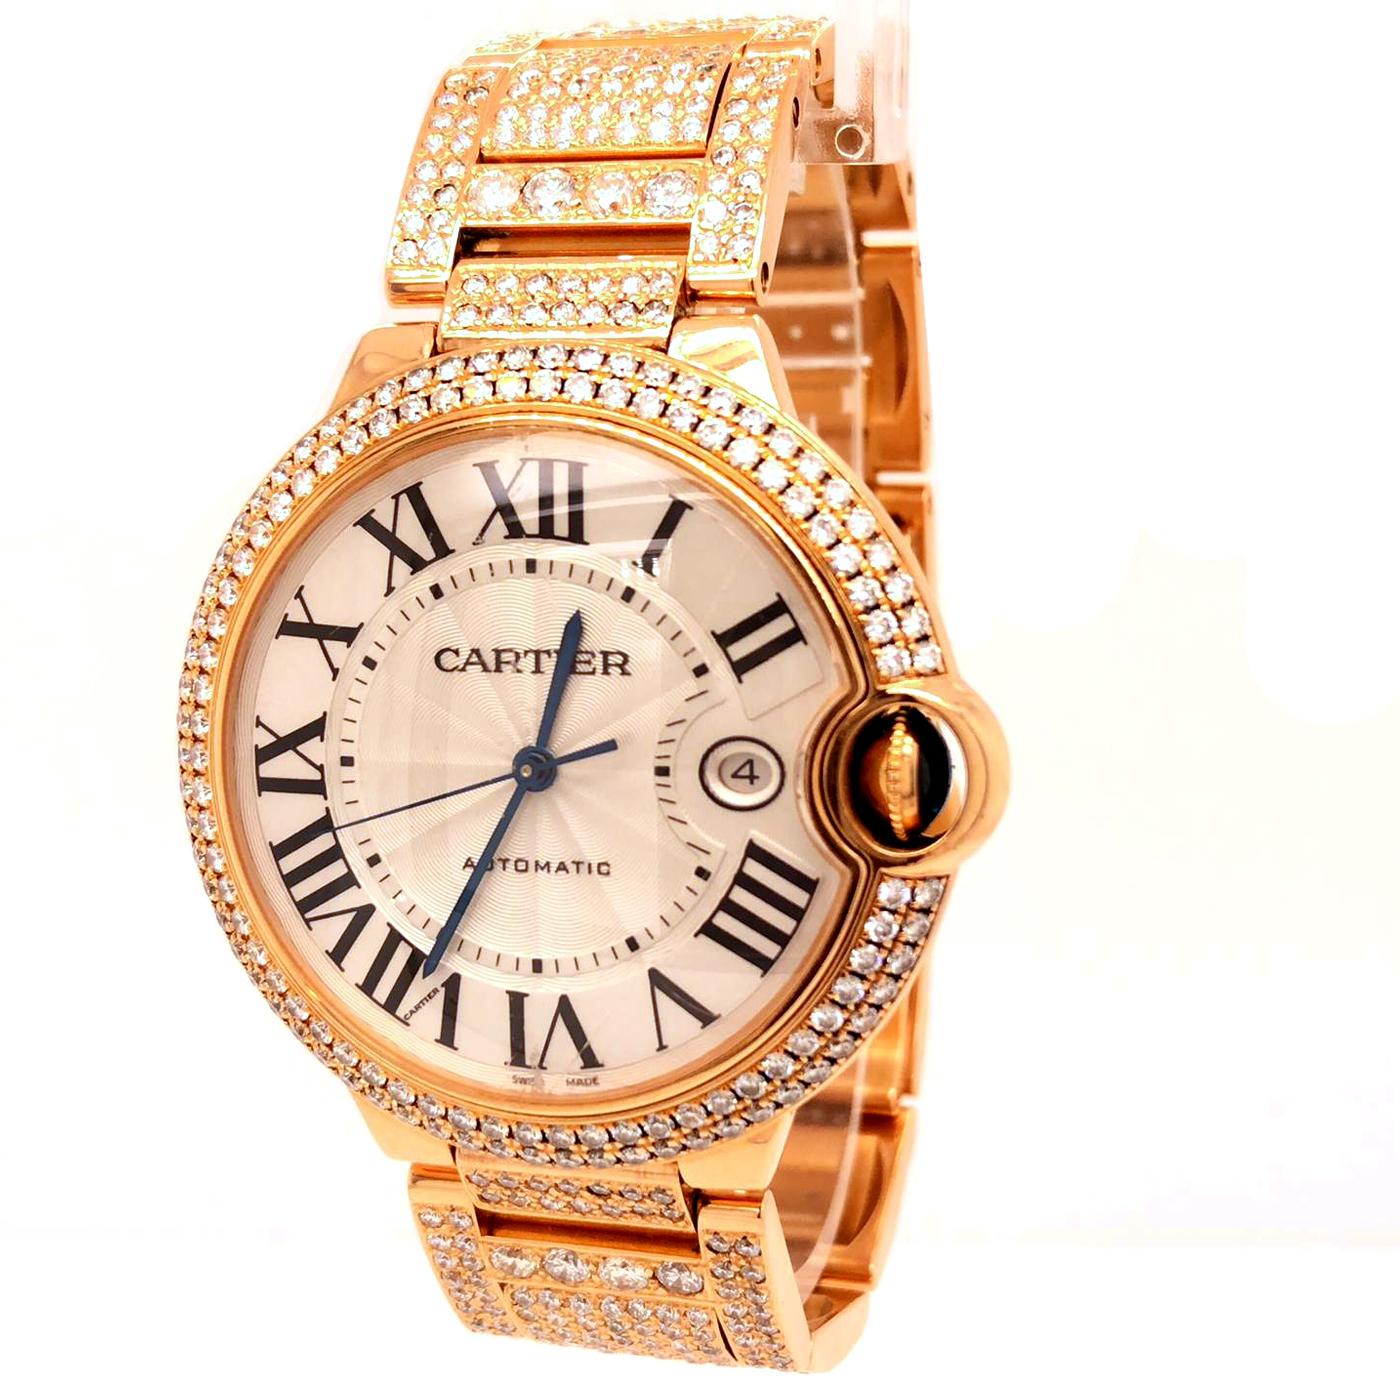 Ballon Bleu de Cartier watch 42 mm, self-winding mechanical movement. 18K pink gold case set with 126 brilliant-cut diamonds totaling 1.83 carats. Fluted crown set with a sapphire cabochon. Silvered guilloché lacquered opaline dial. Blued-steel